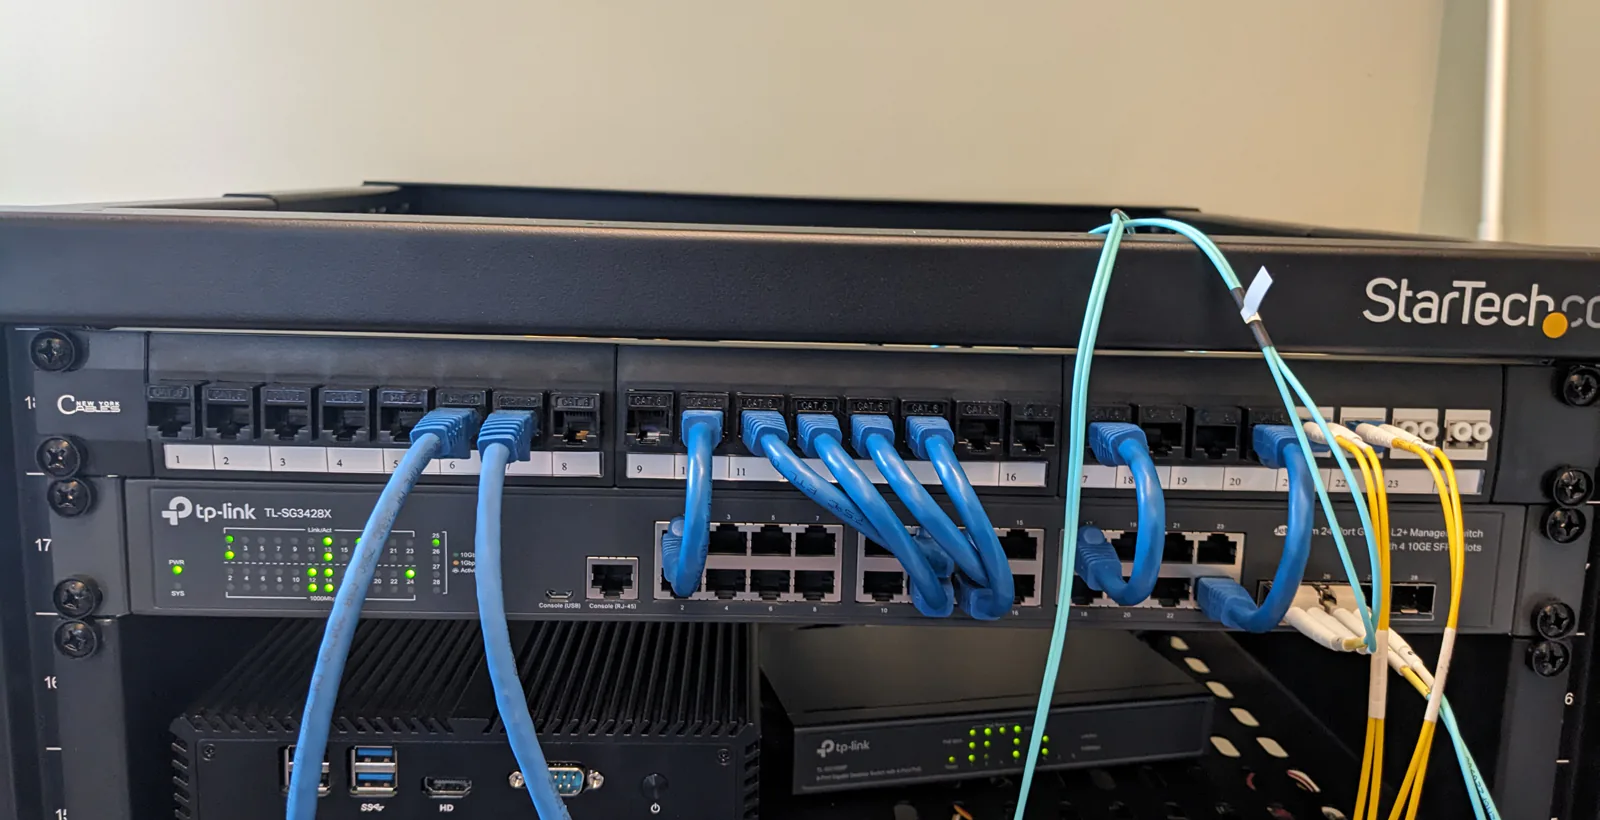 Photo of my TP-Link managed switch